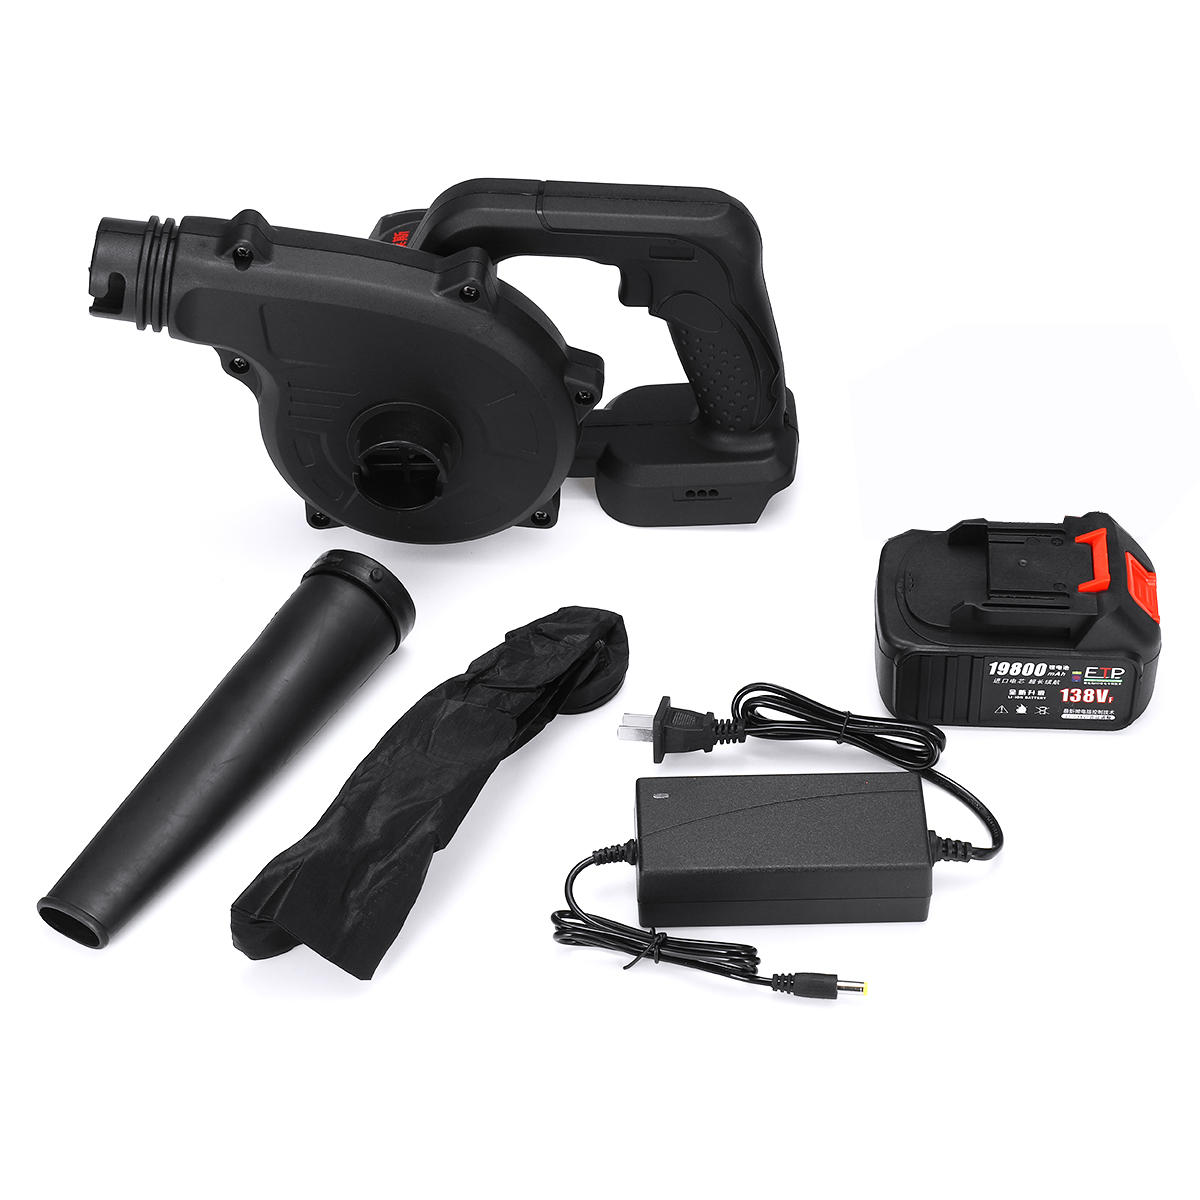 128VF 19800mAh 220V Electric Cordless Blower Stepless Speed Change Lithium Battery Sucking Dual-use Dust Computer cleane